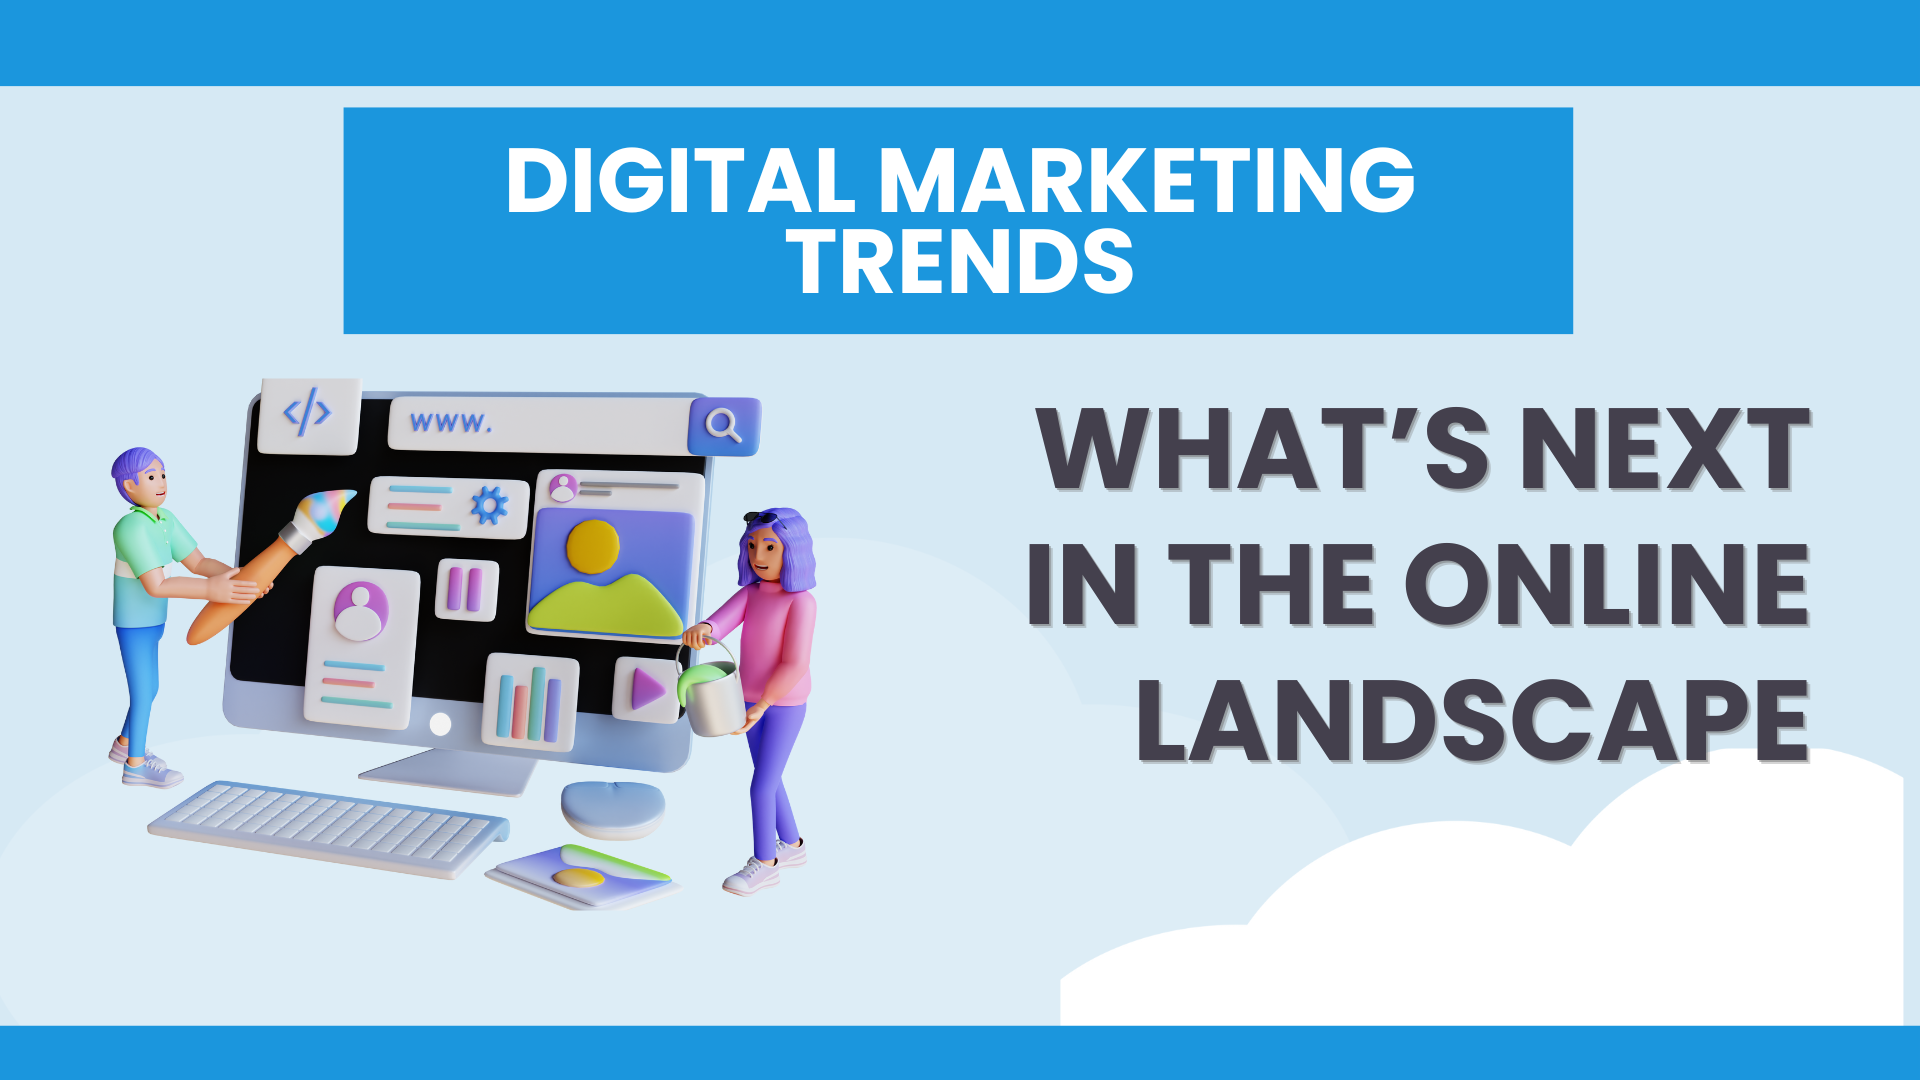 Digital Marketing Trends: What's Next in the Online Landscape